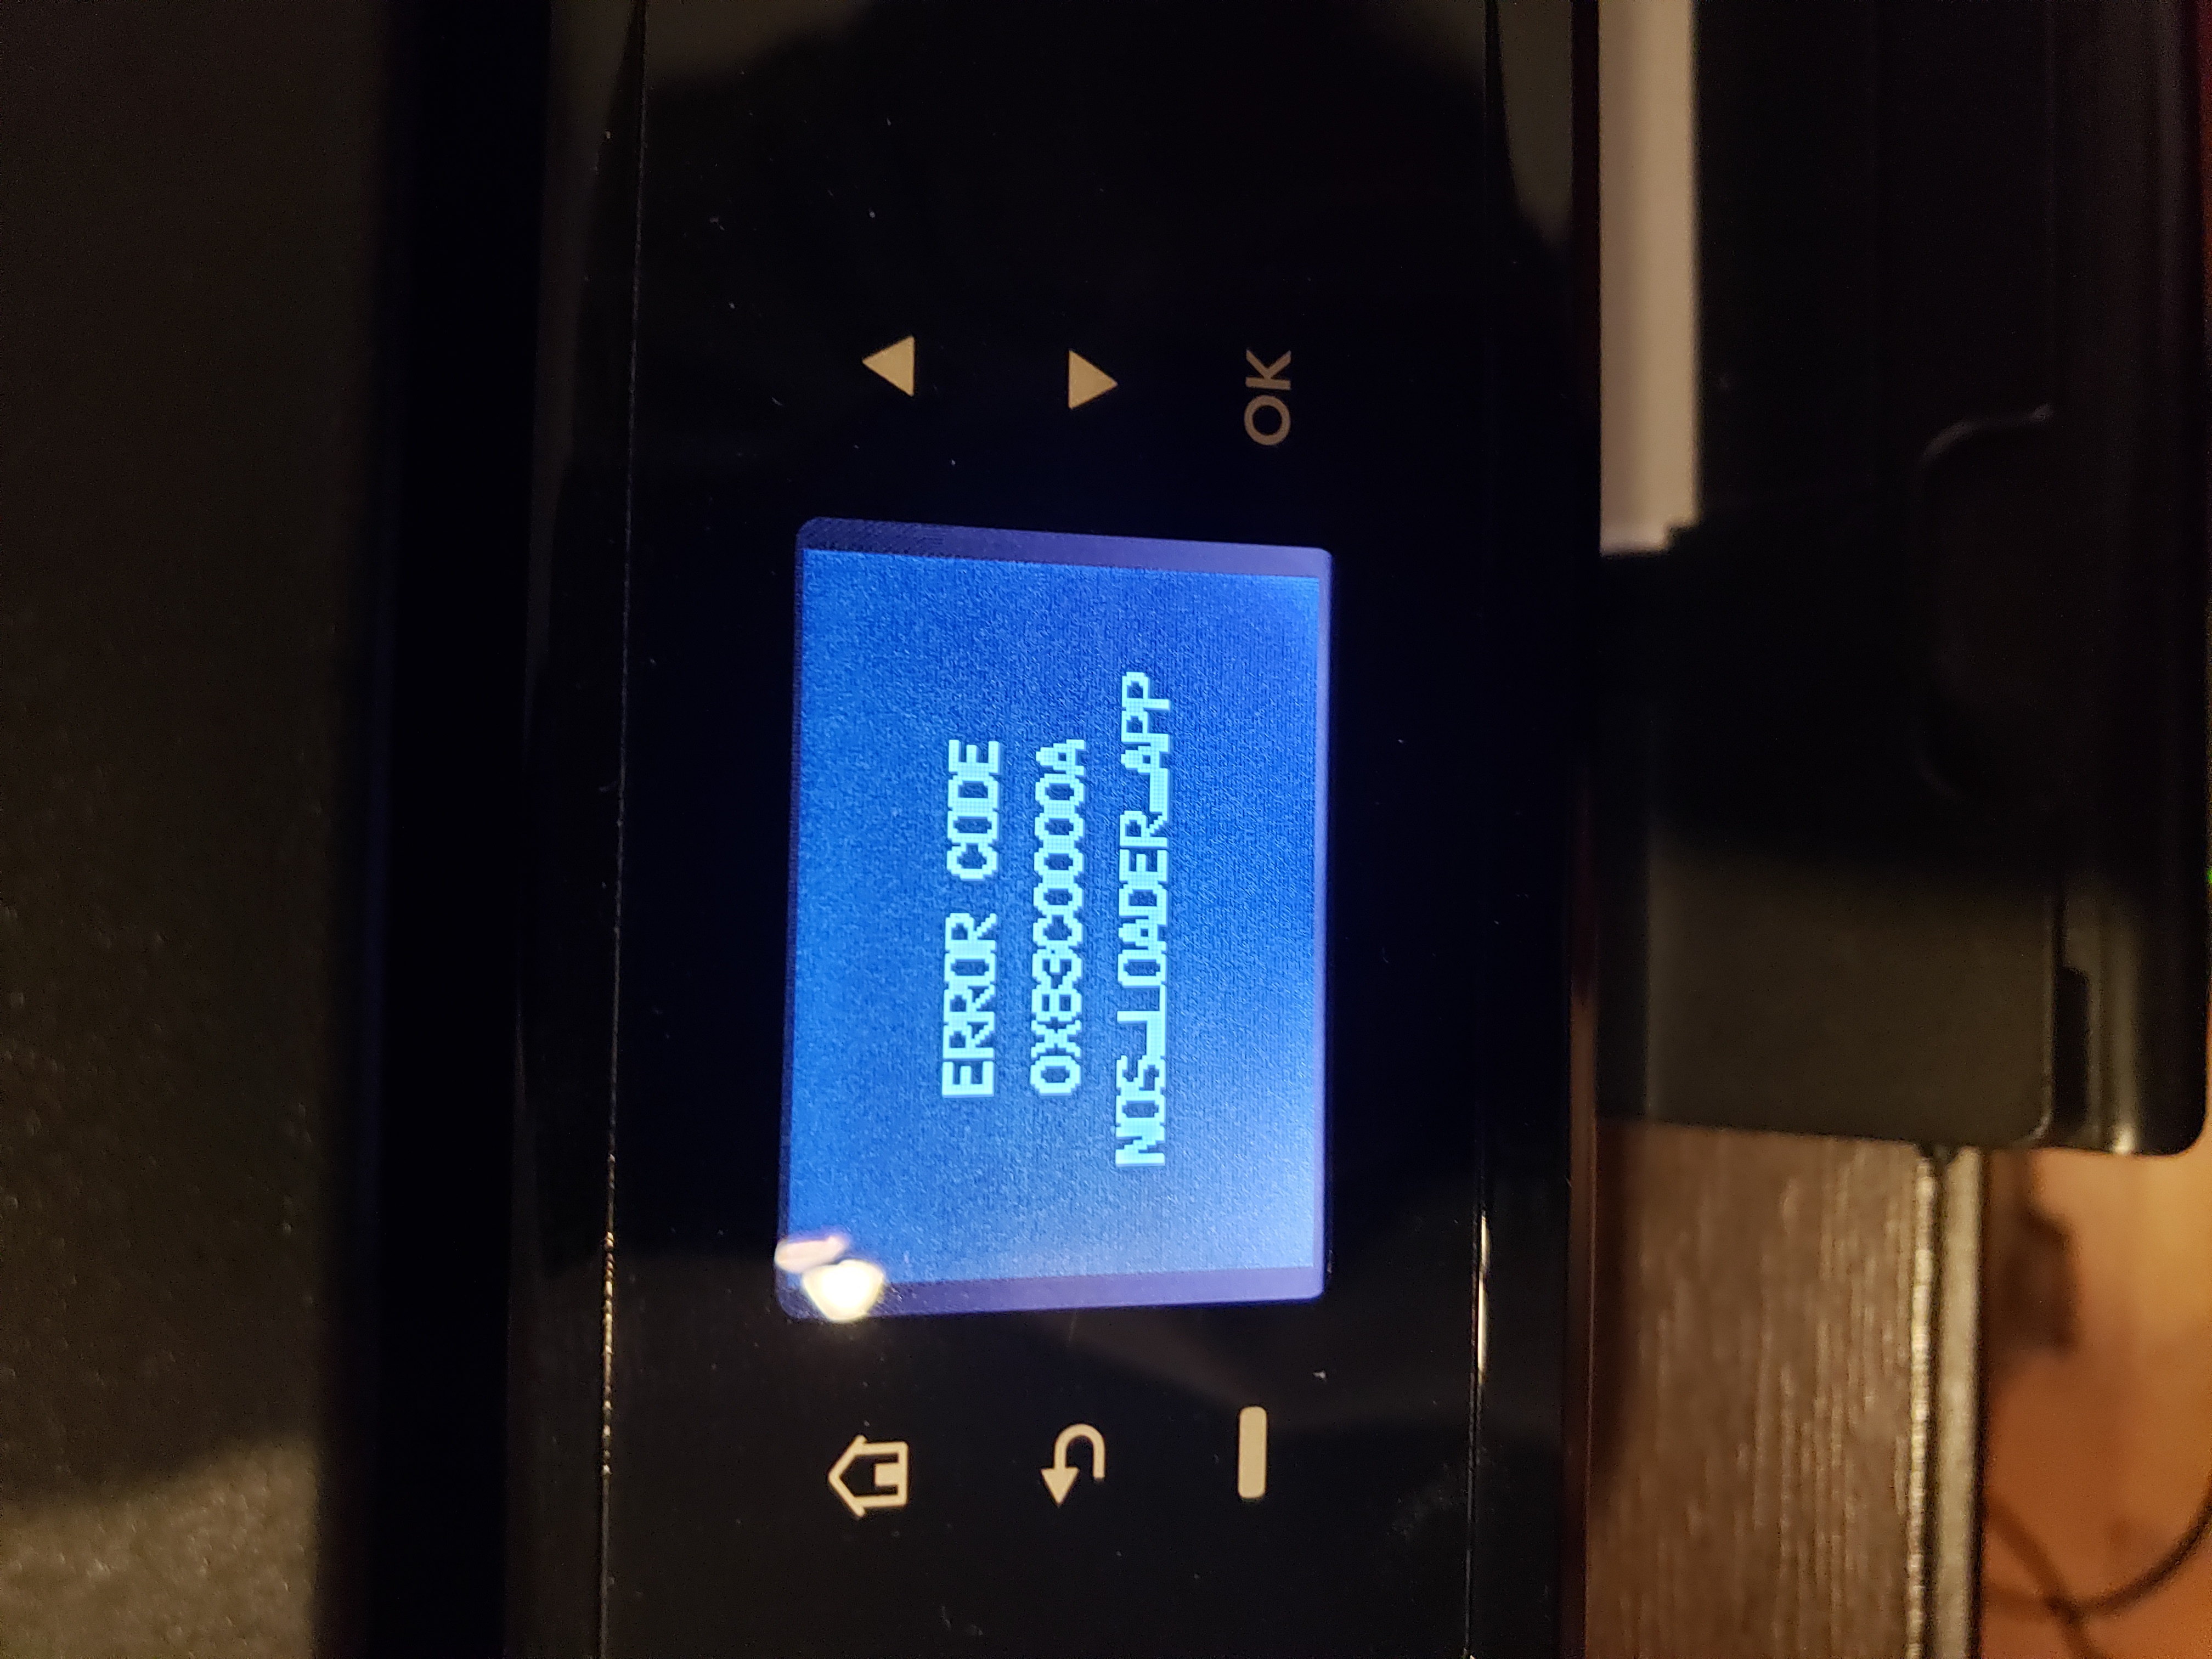 I Have An Hp 4645 And It Is Showing Error Code 0xb3dff104 P Hp Support Community 7510482